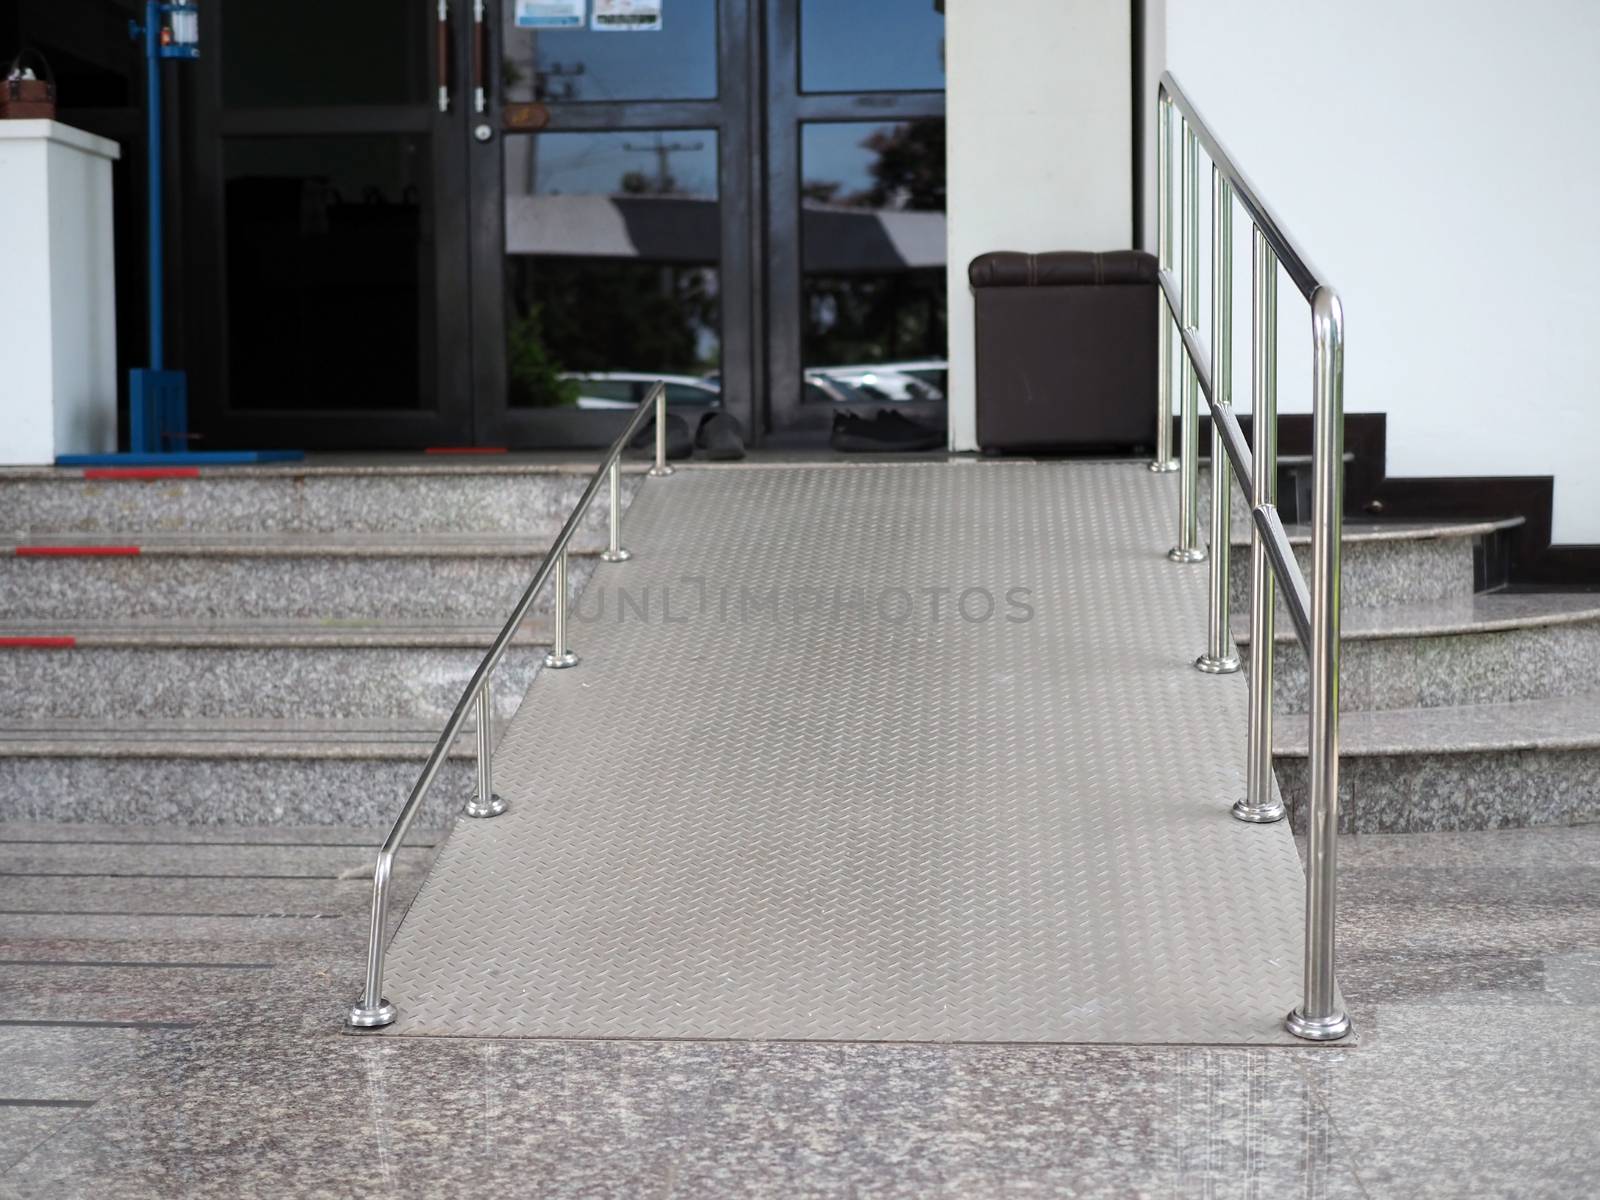 A ramp for disabled people going up and down in the hospital. by Unimages2527